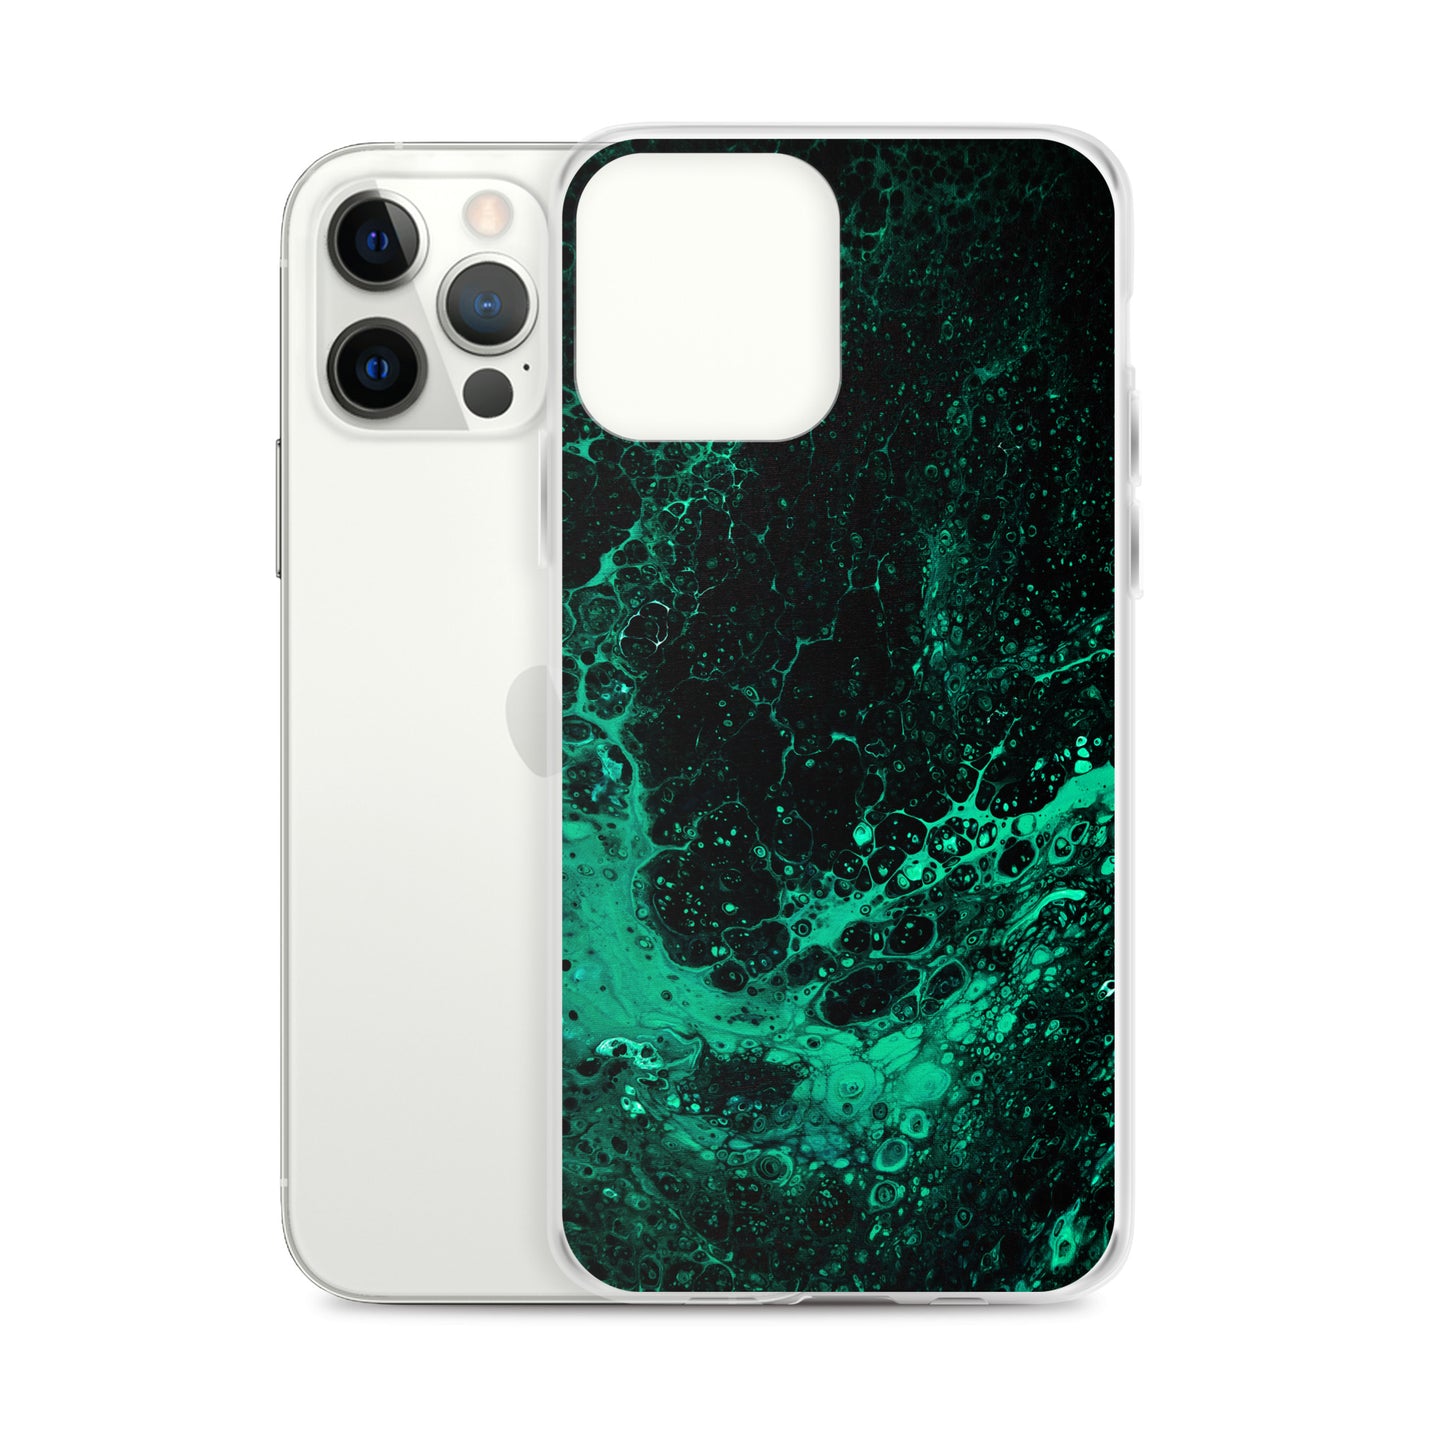 NightOwl Studio Custom Phone Case Compatible with iPhone, Ultra Slim Cover with Heavy Duty Scratch Resistant Shockproof Protection, Green Tide